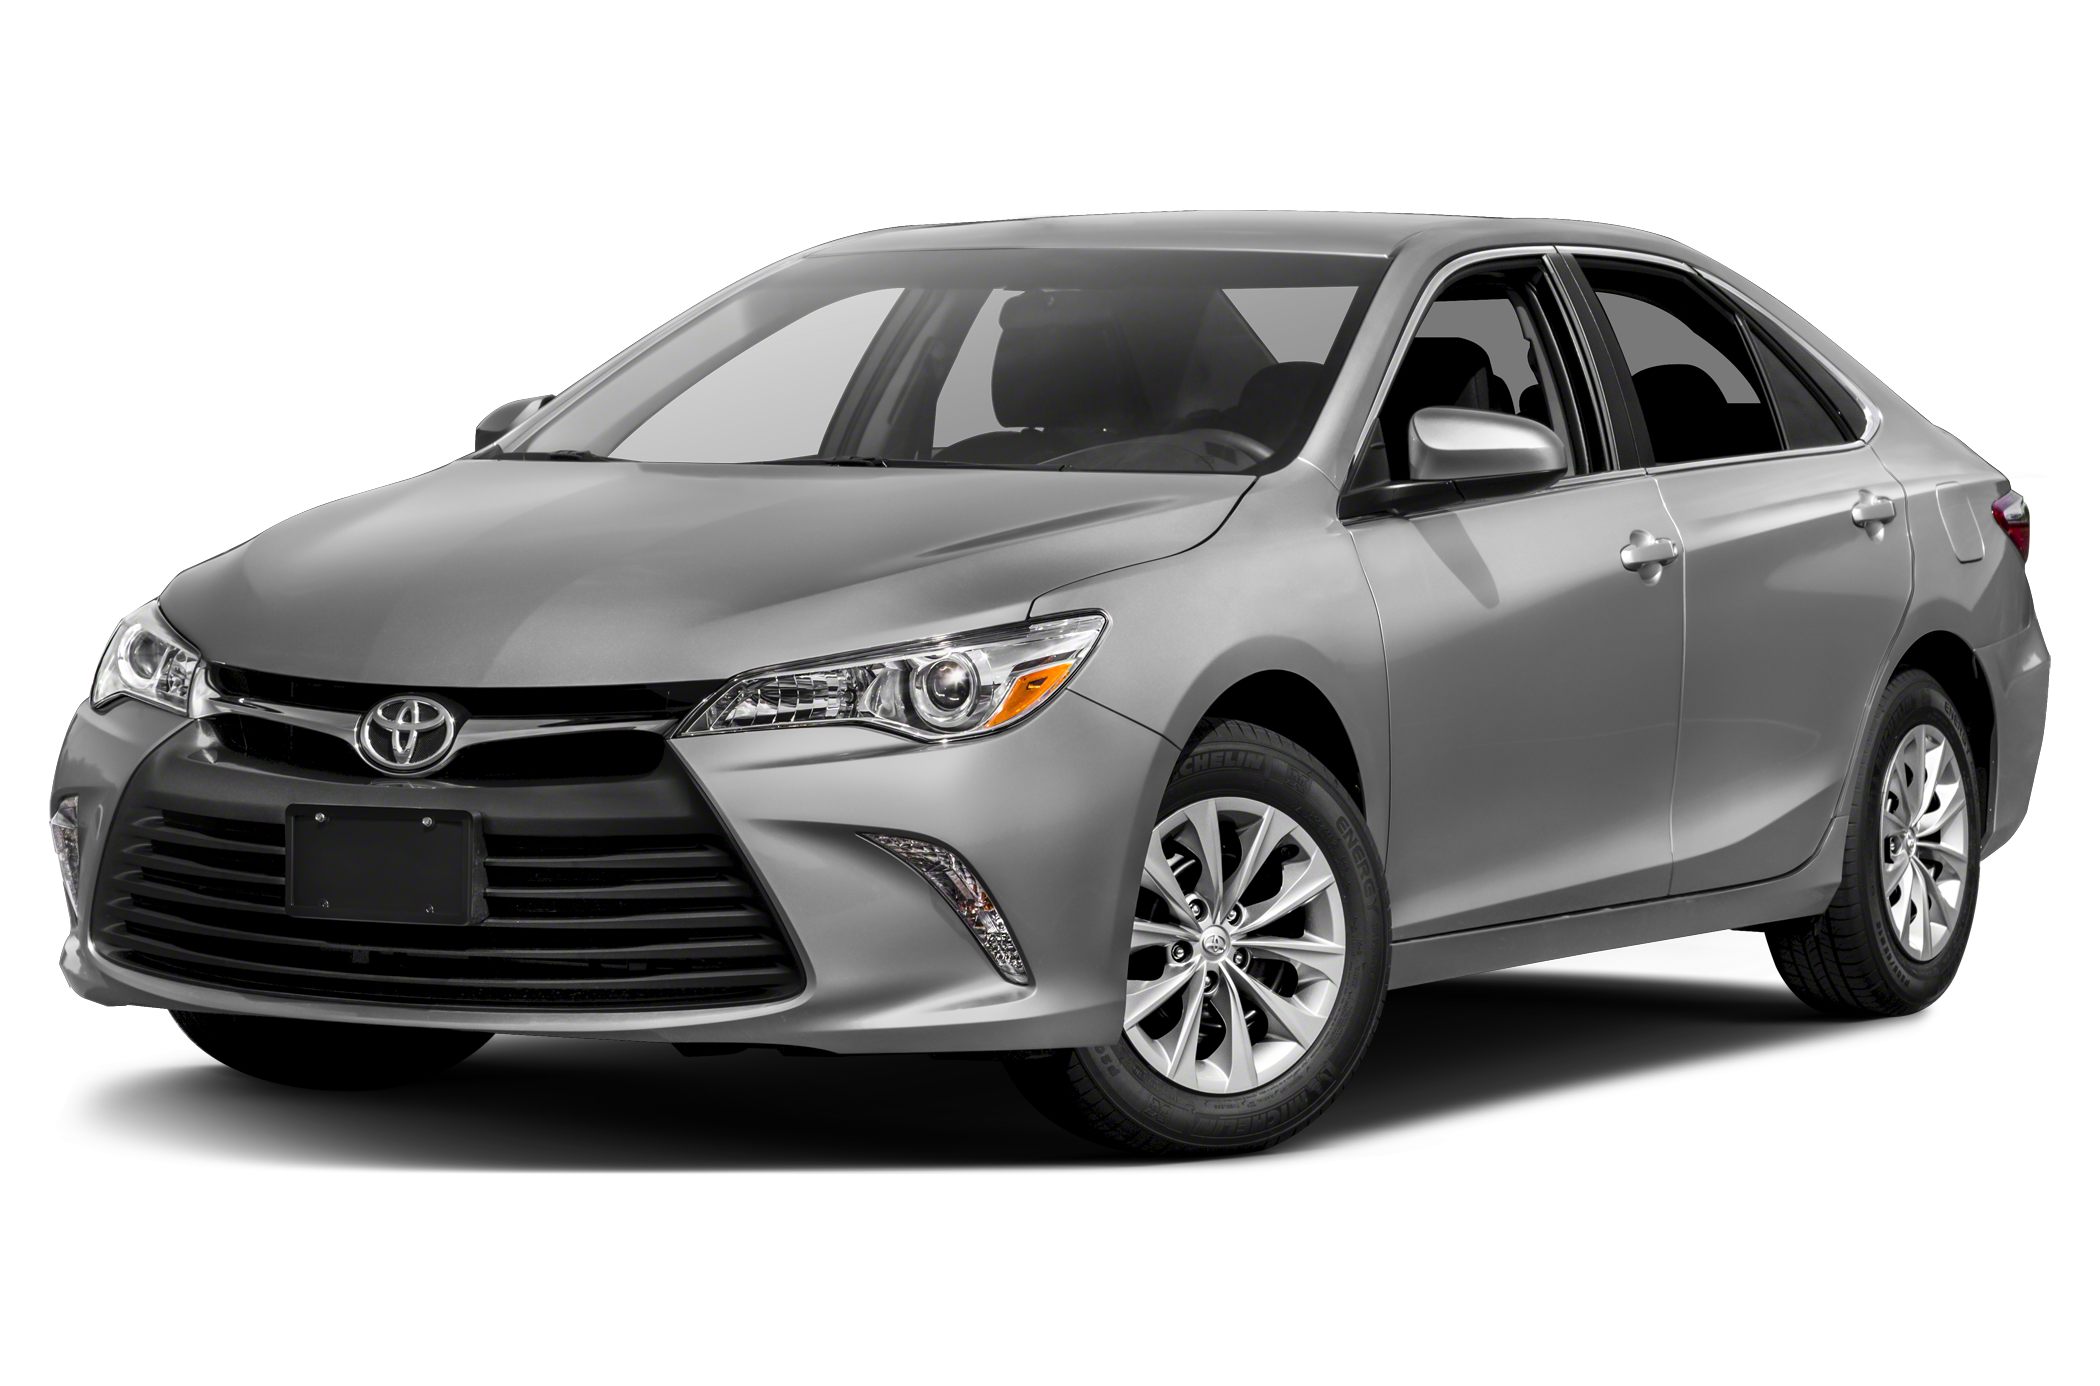 2016 Toyota Camry Le 4dr Sedan Pictures